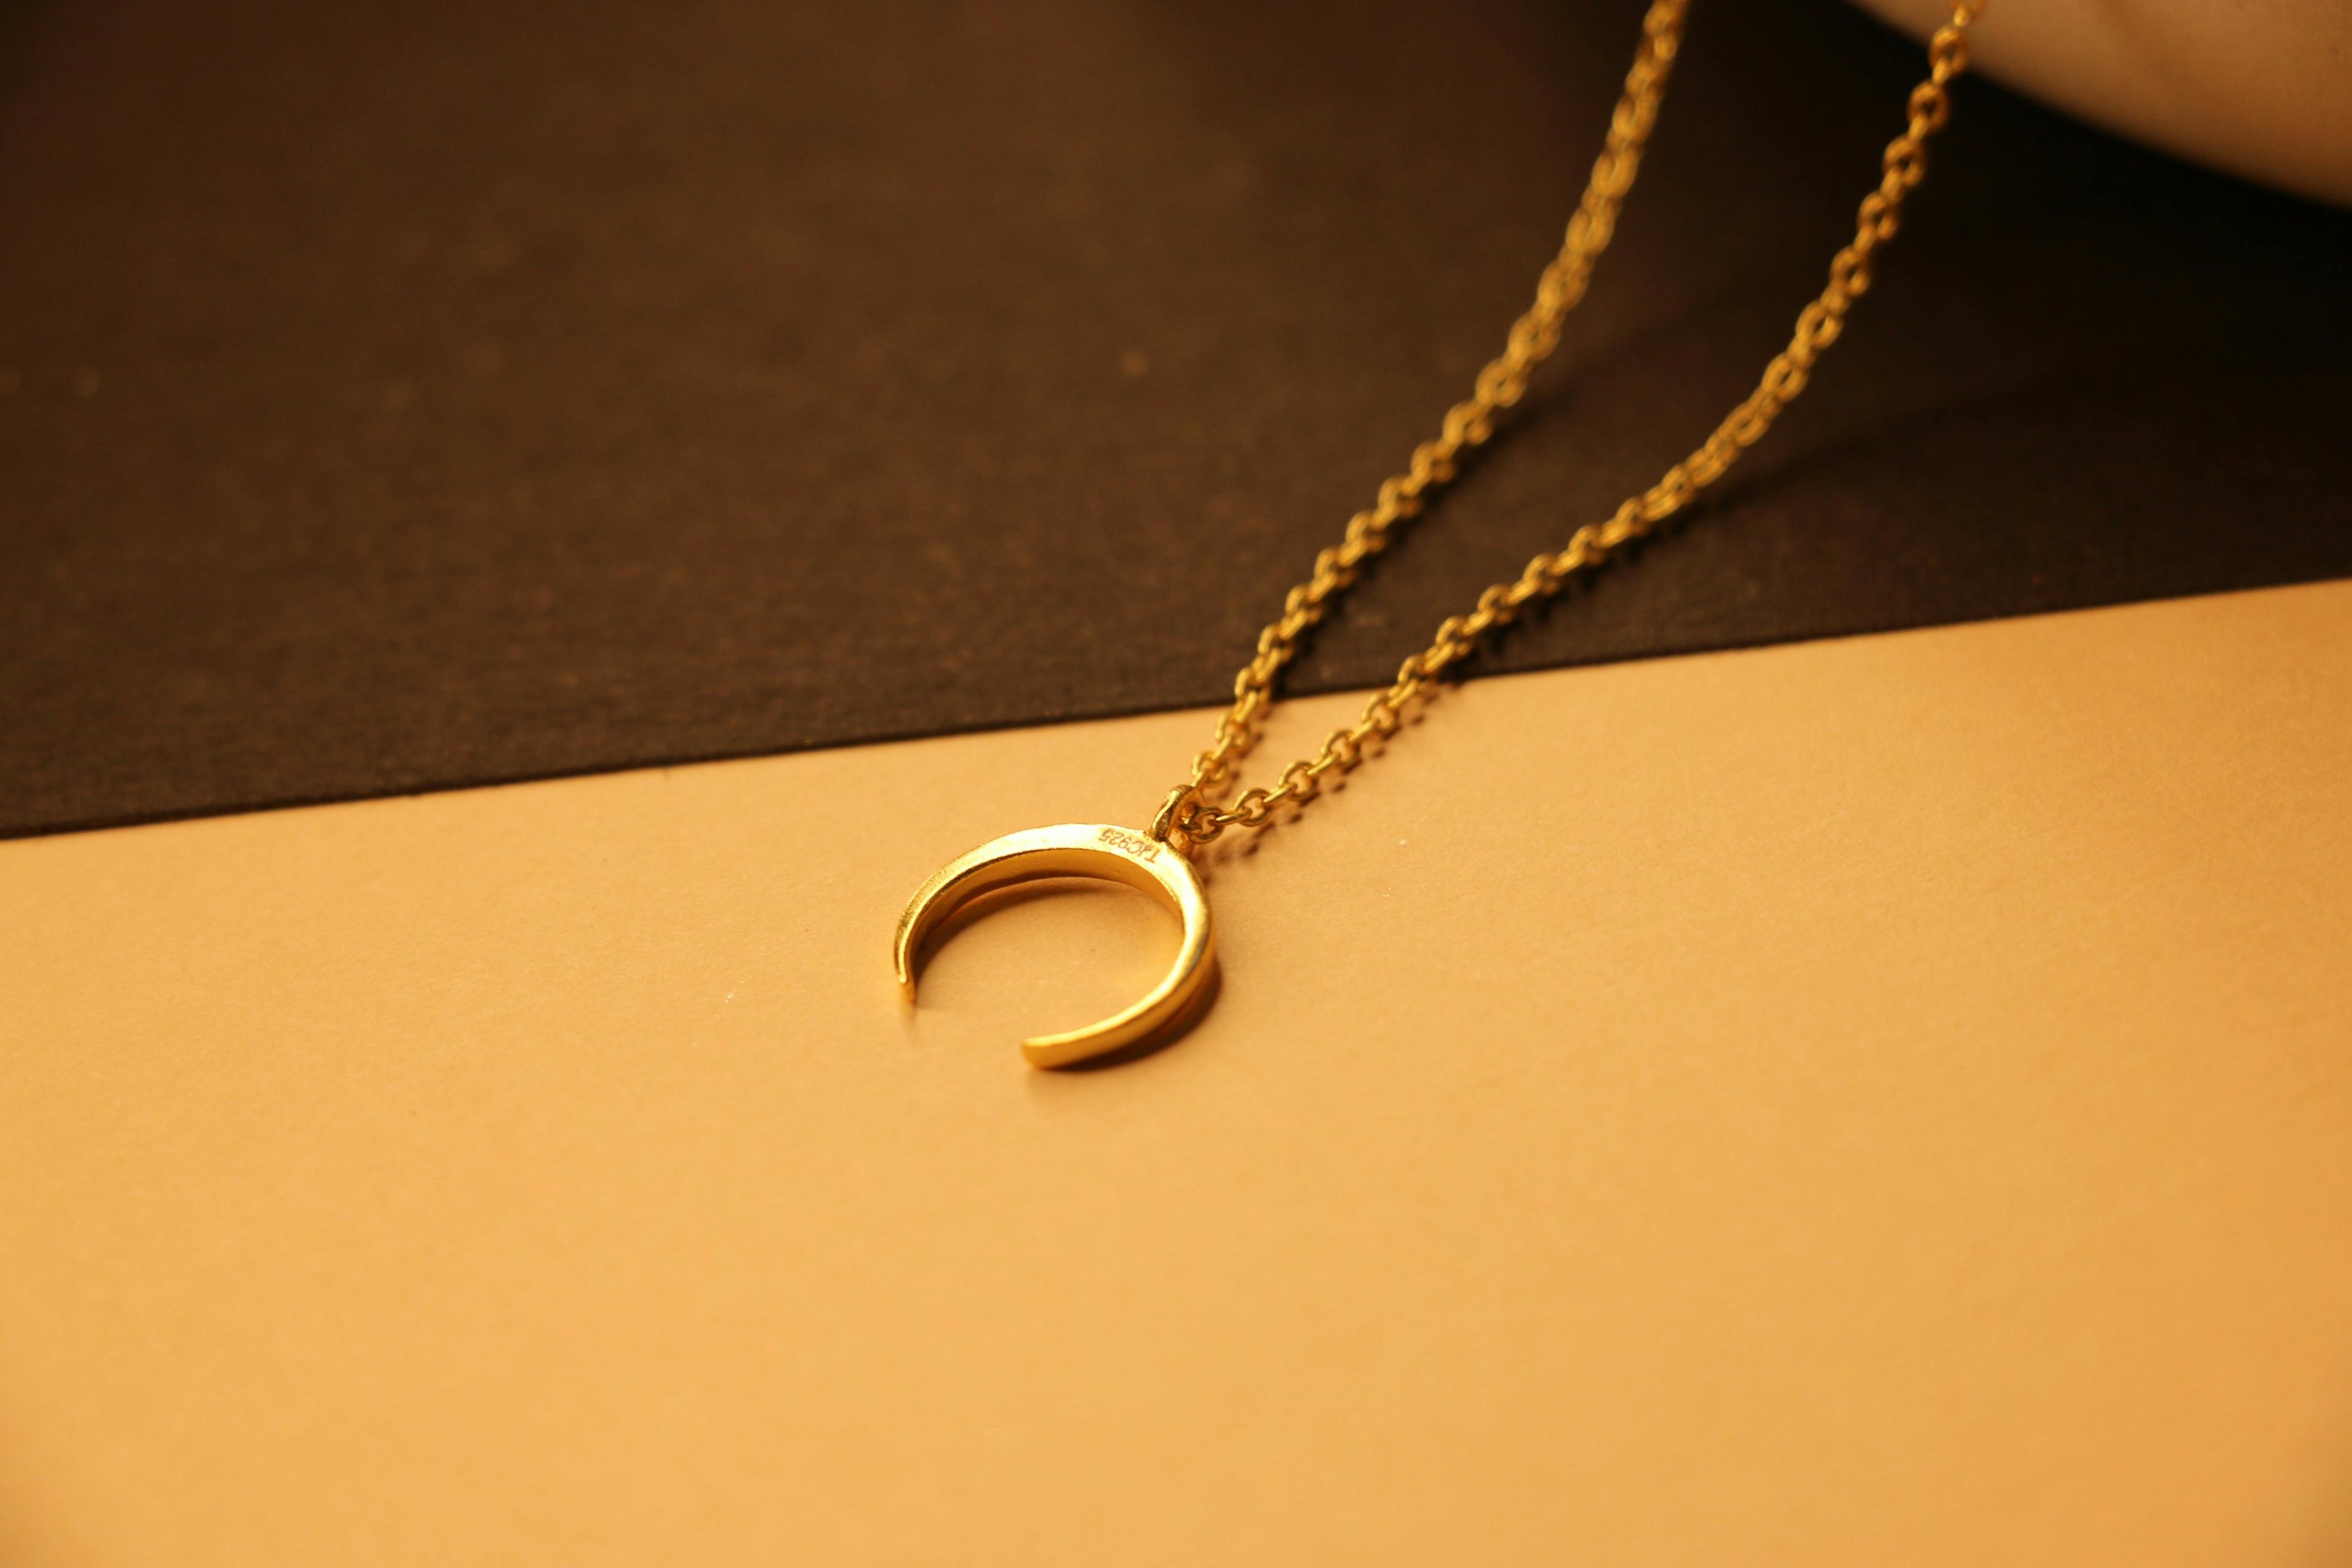 Moon shaped necklace, a product by The Jewel Closet Store